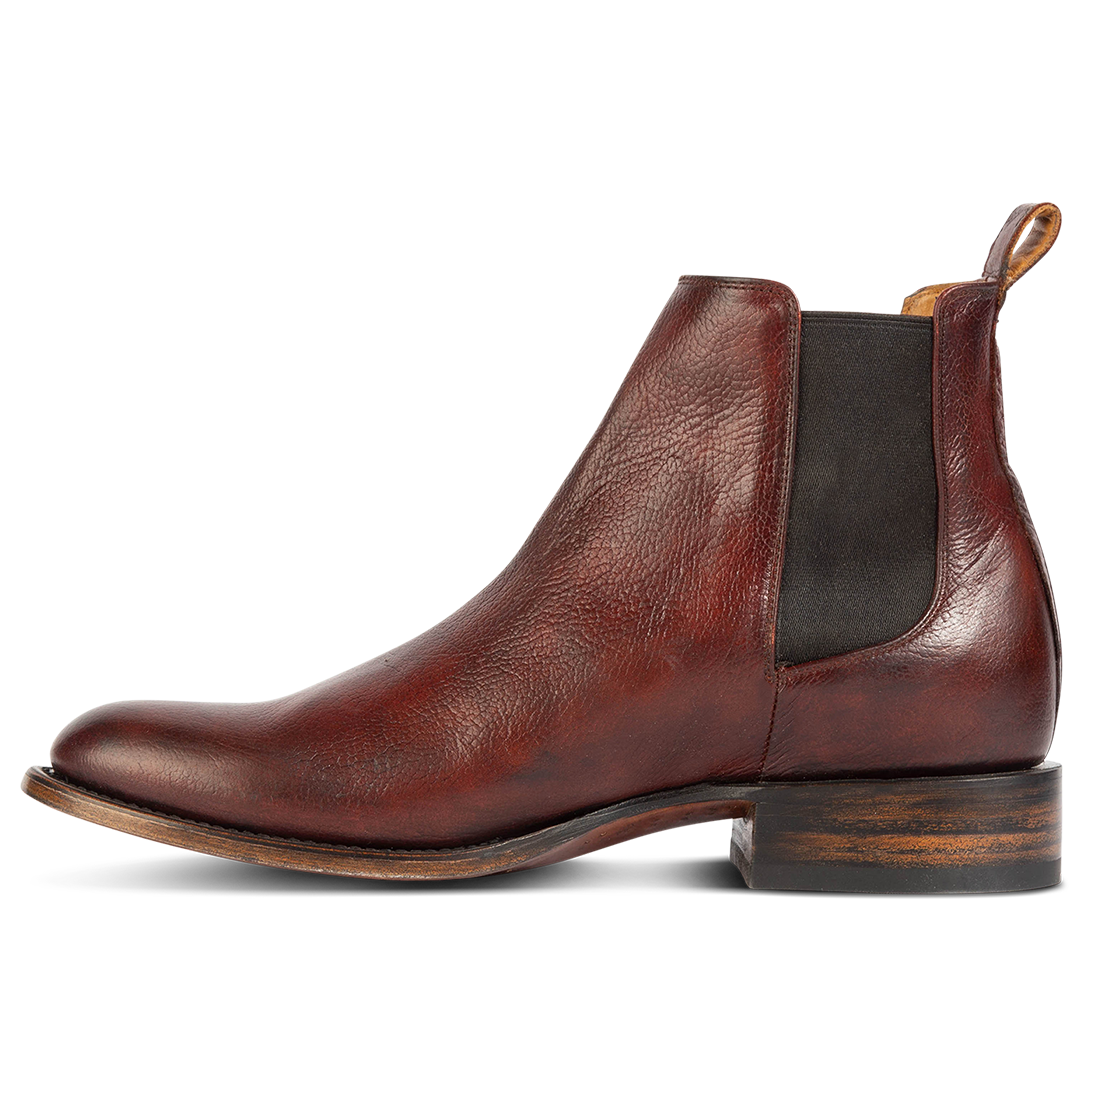 Inside view showing gore detailing on FREEBIRD men's Palmer rust low heeled ankle boot 